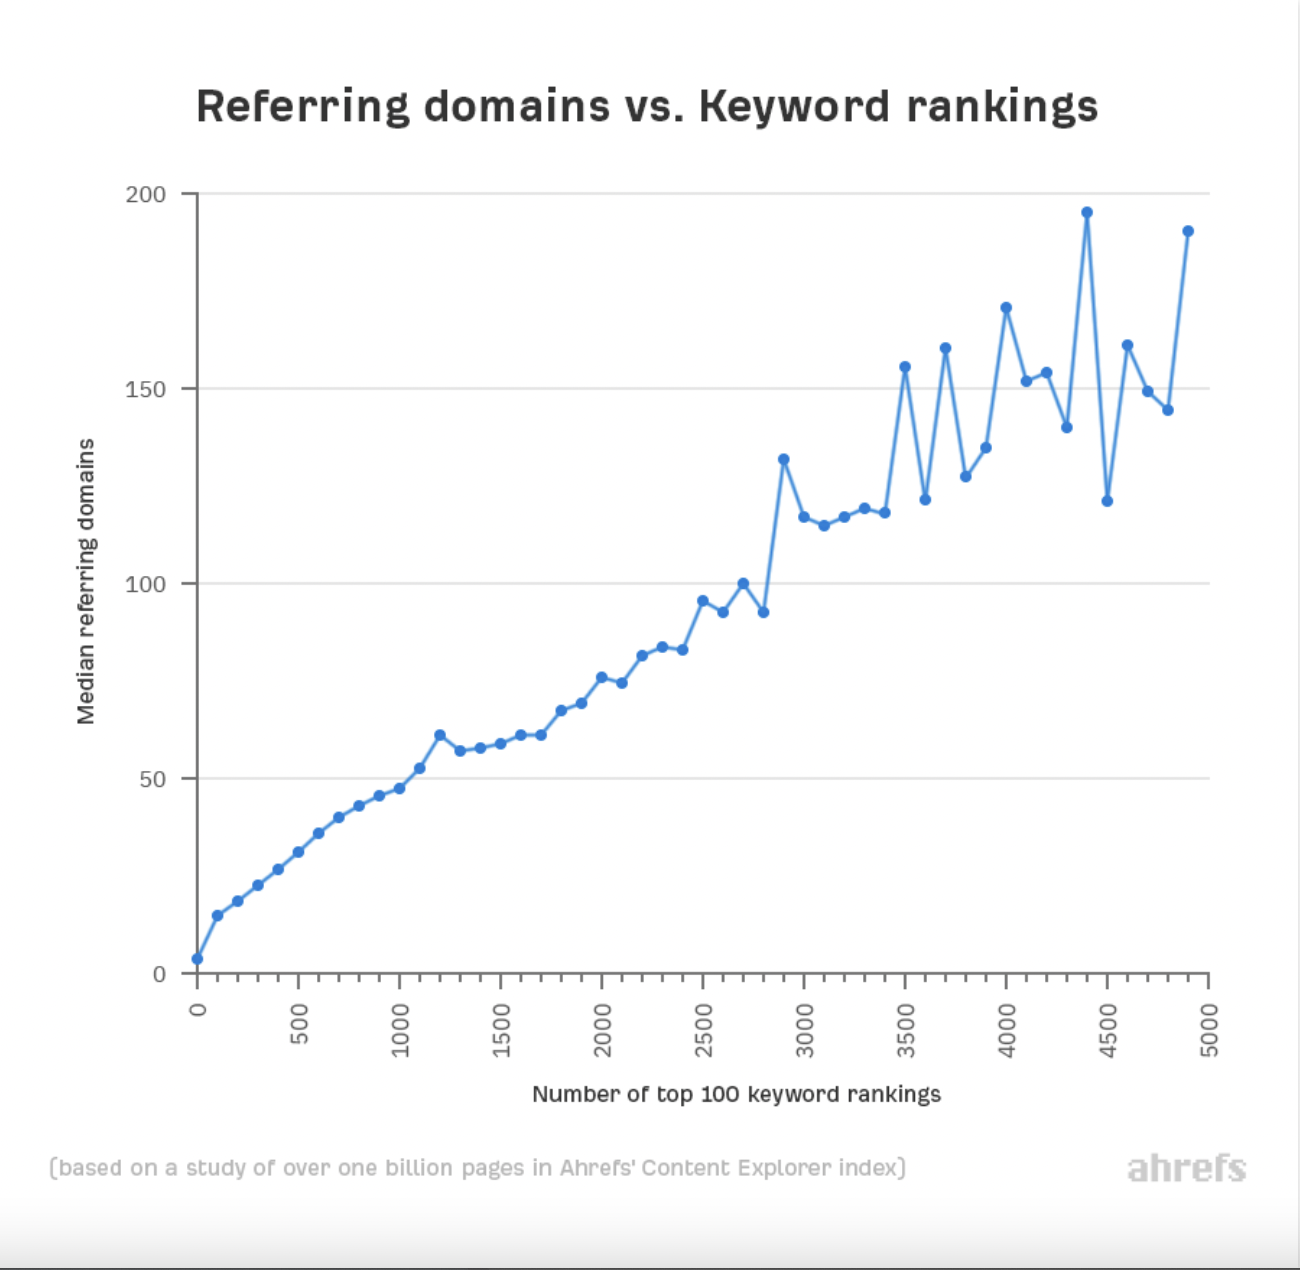 correlation between the number of referring domains and keyword rankings.